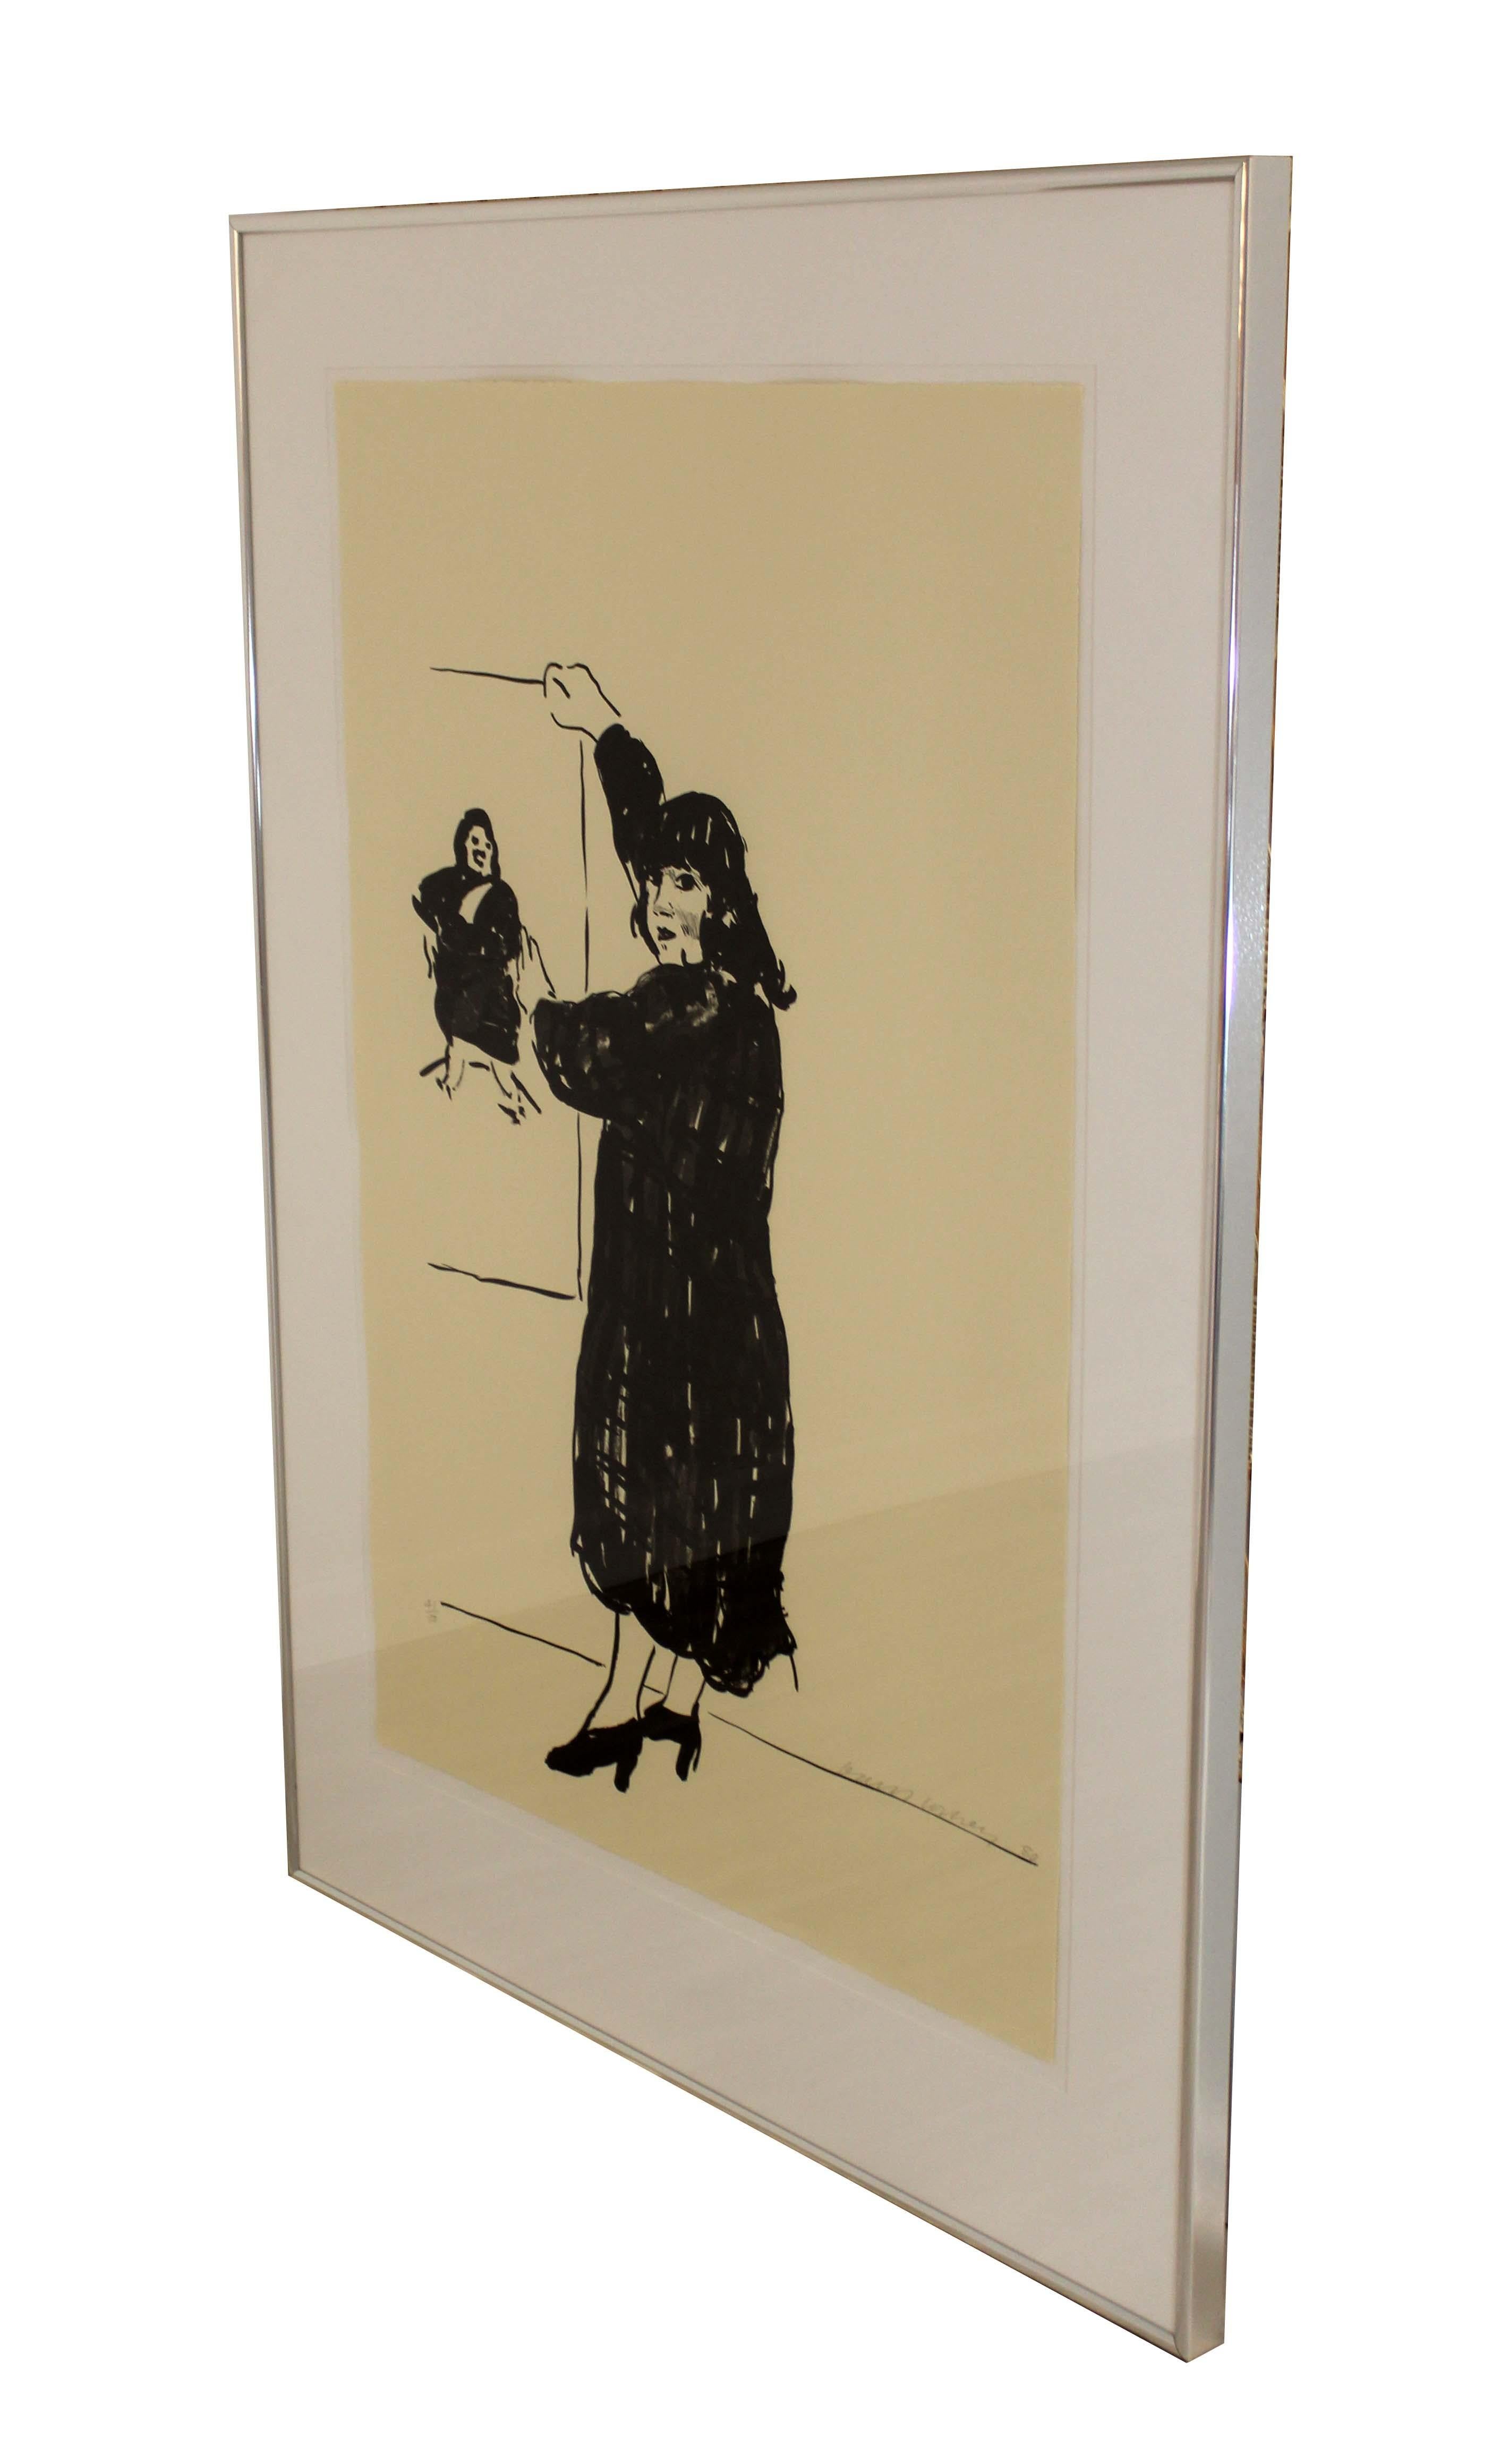 A chic, graphic lithograph titled Ann Looking At Her Picture, with an annotation of 41/50, and hand signed in pencil on bottom right by David Hockney. Dimensions: 58.25 h x 40w (framed). In excellent vintage condition. 

David Hockney (1937- ) is